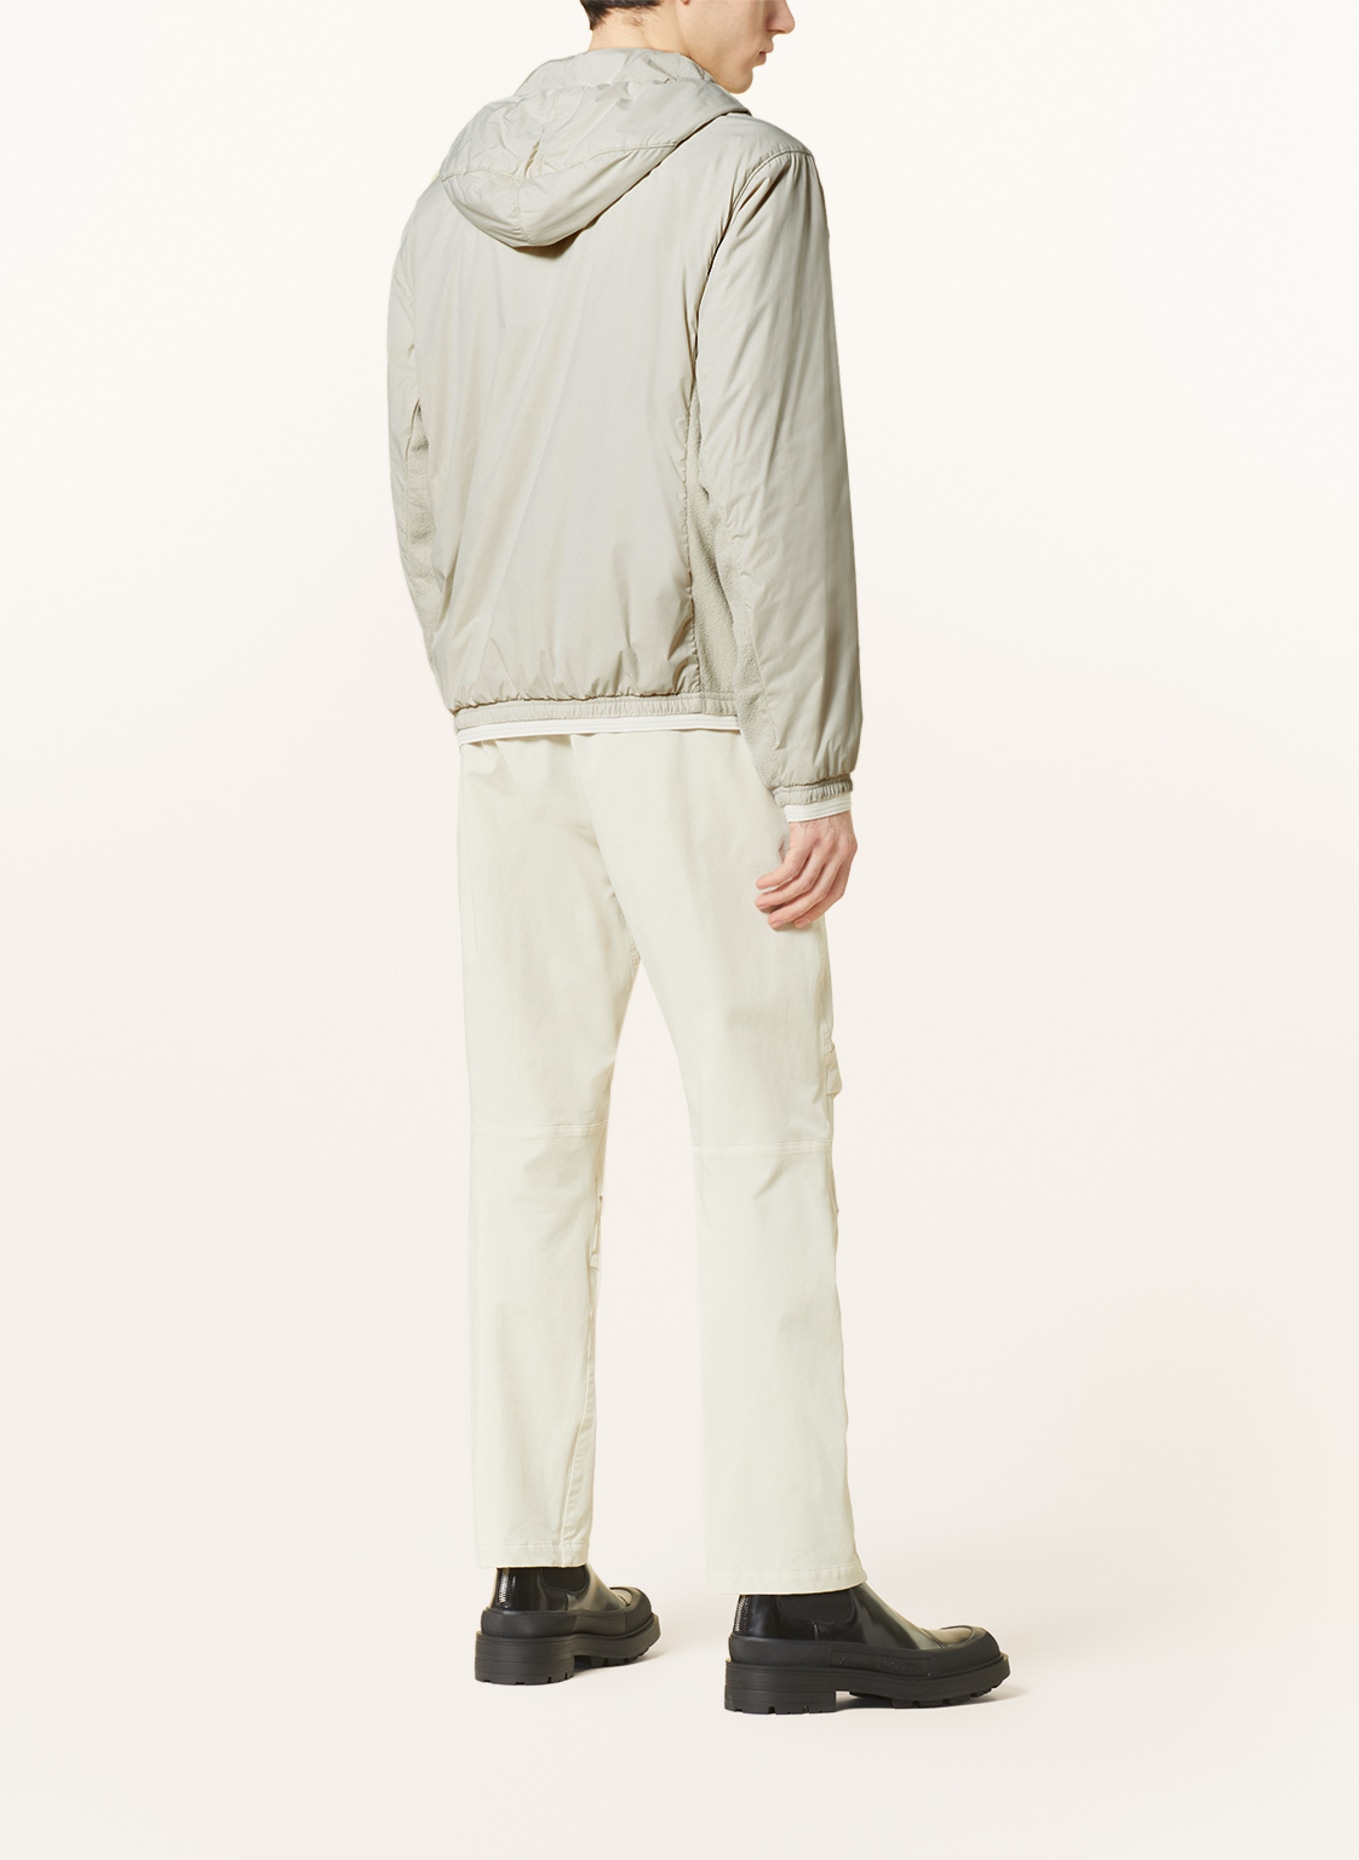 STONE ISLAND Jacket in mixed materials, Color: ECRU (Image 3)